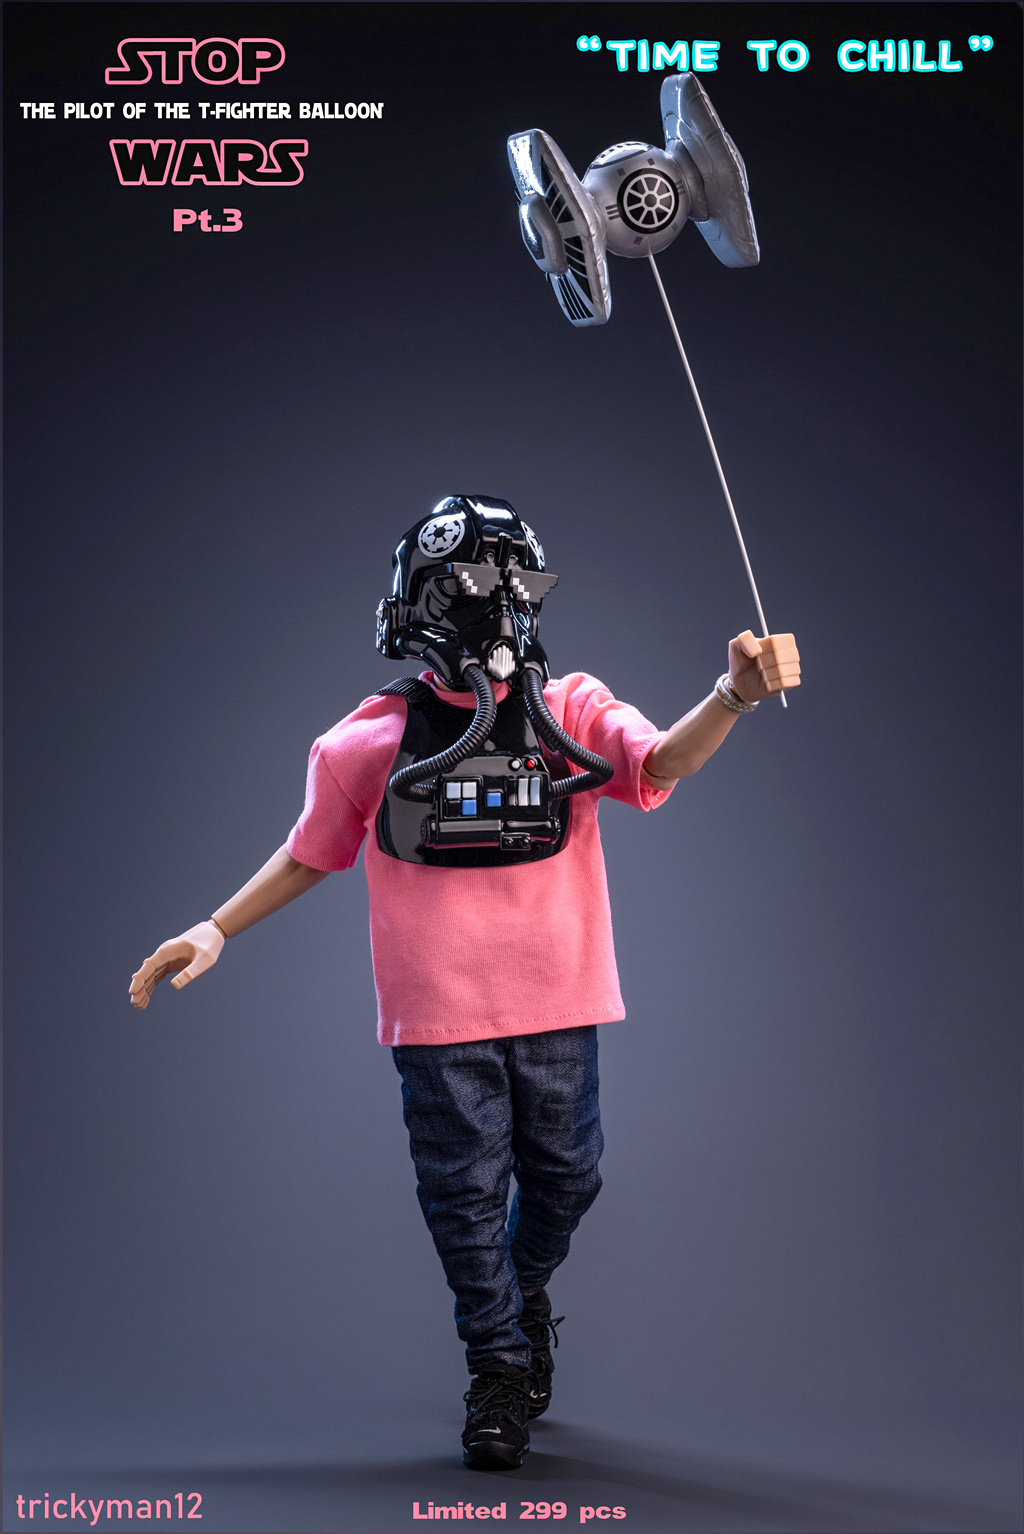 StopWars - NEW PRODUCT: STOPWARS Pt.3: 1/6 scale THE PILOT OF THE T-FIGHTER BALLOON 16580212